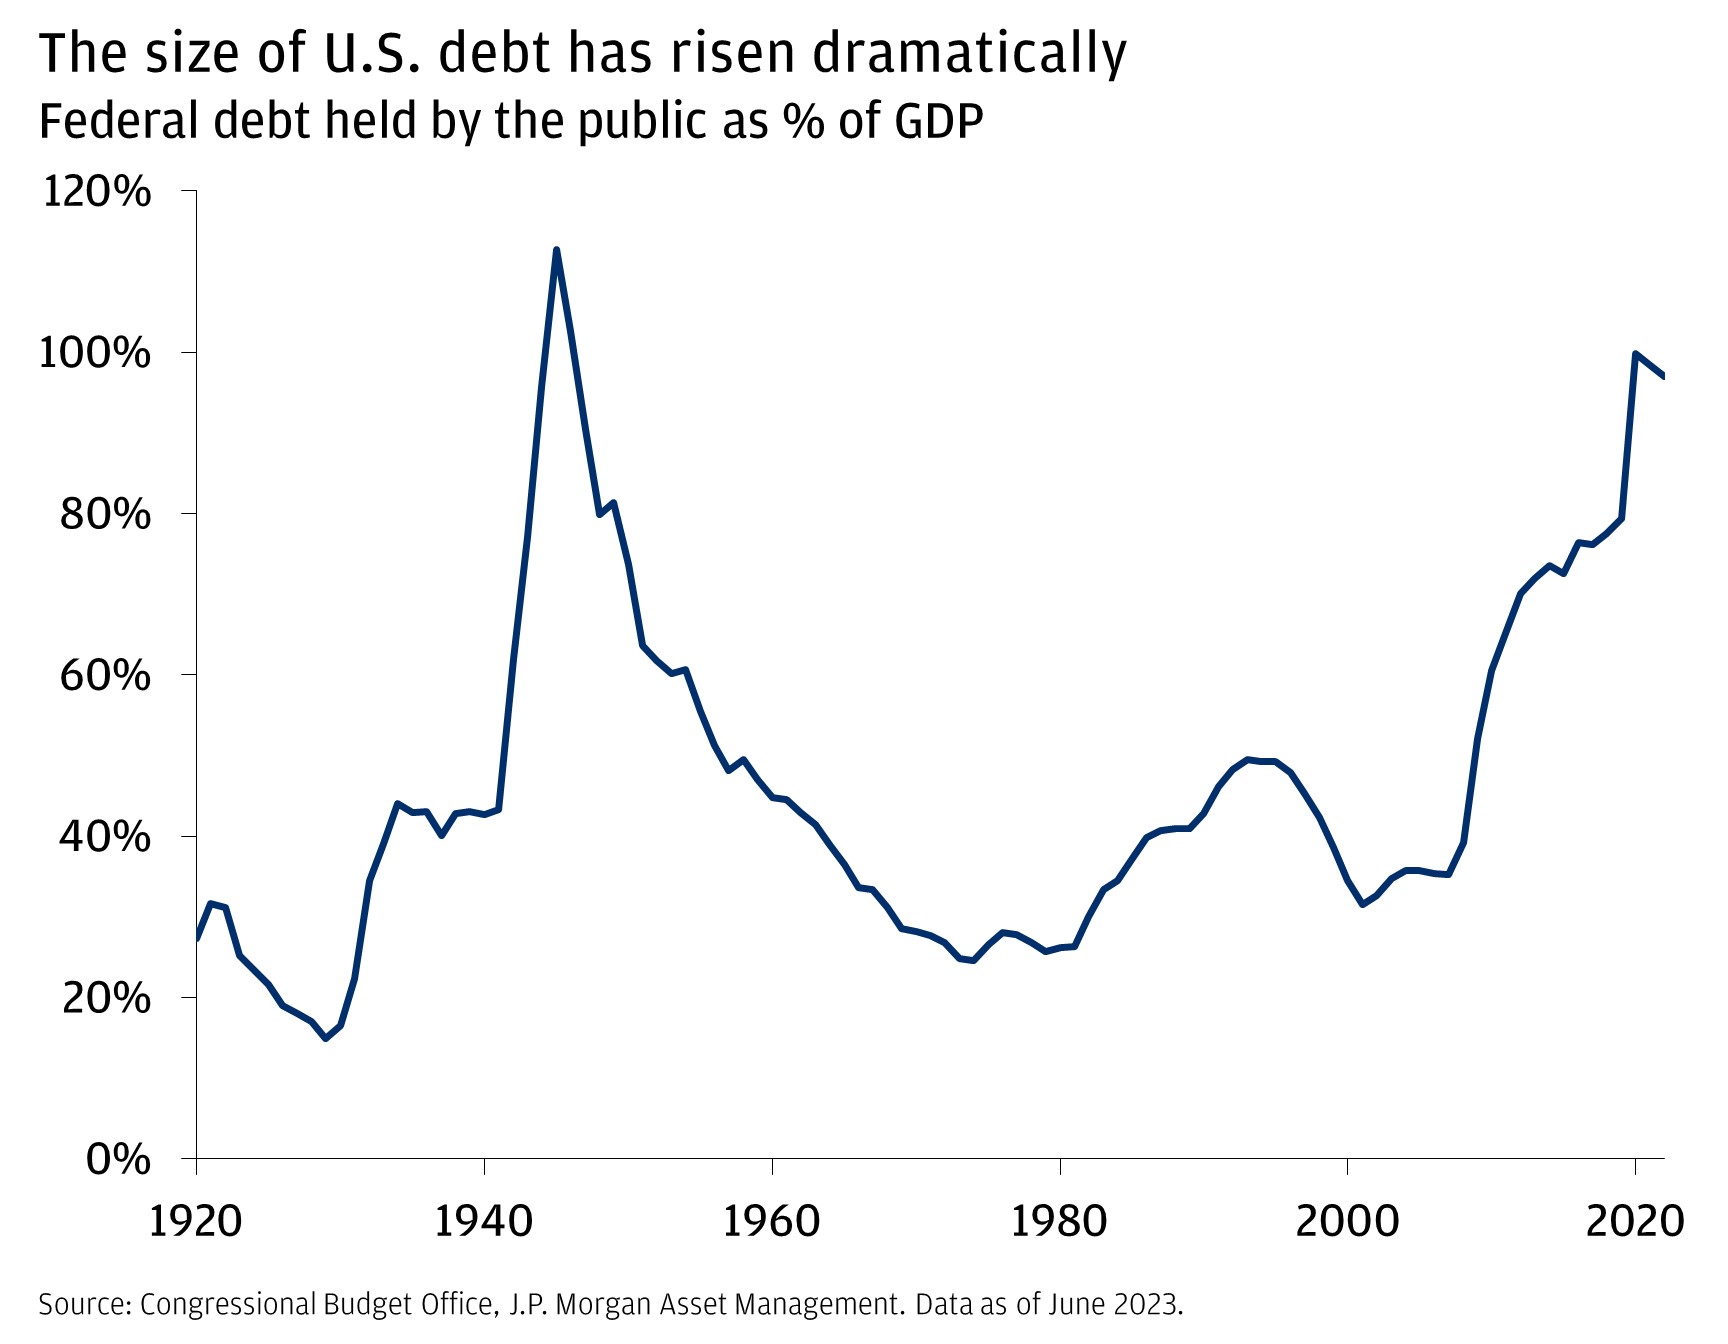 The size of U.S. debt has risen dramatically